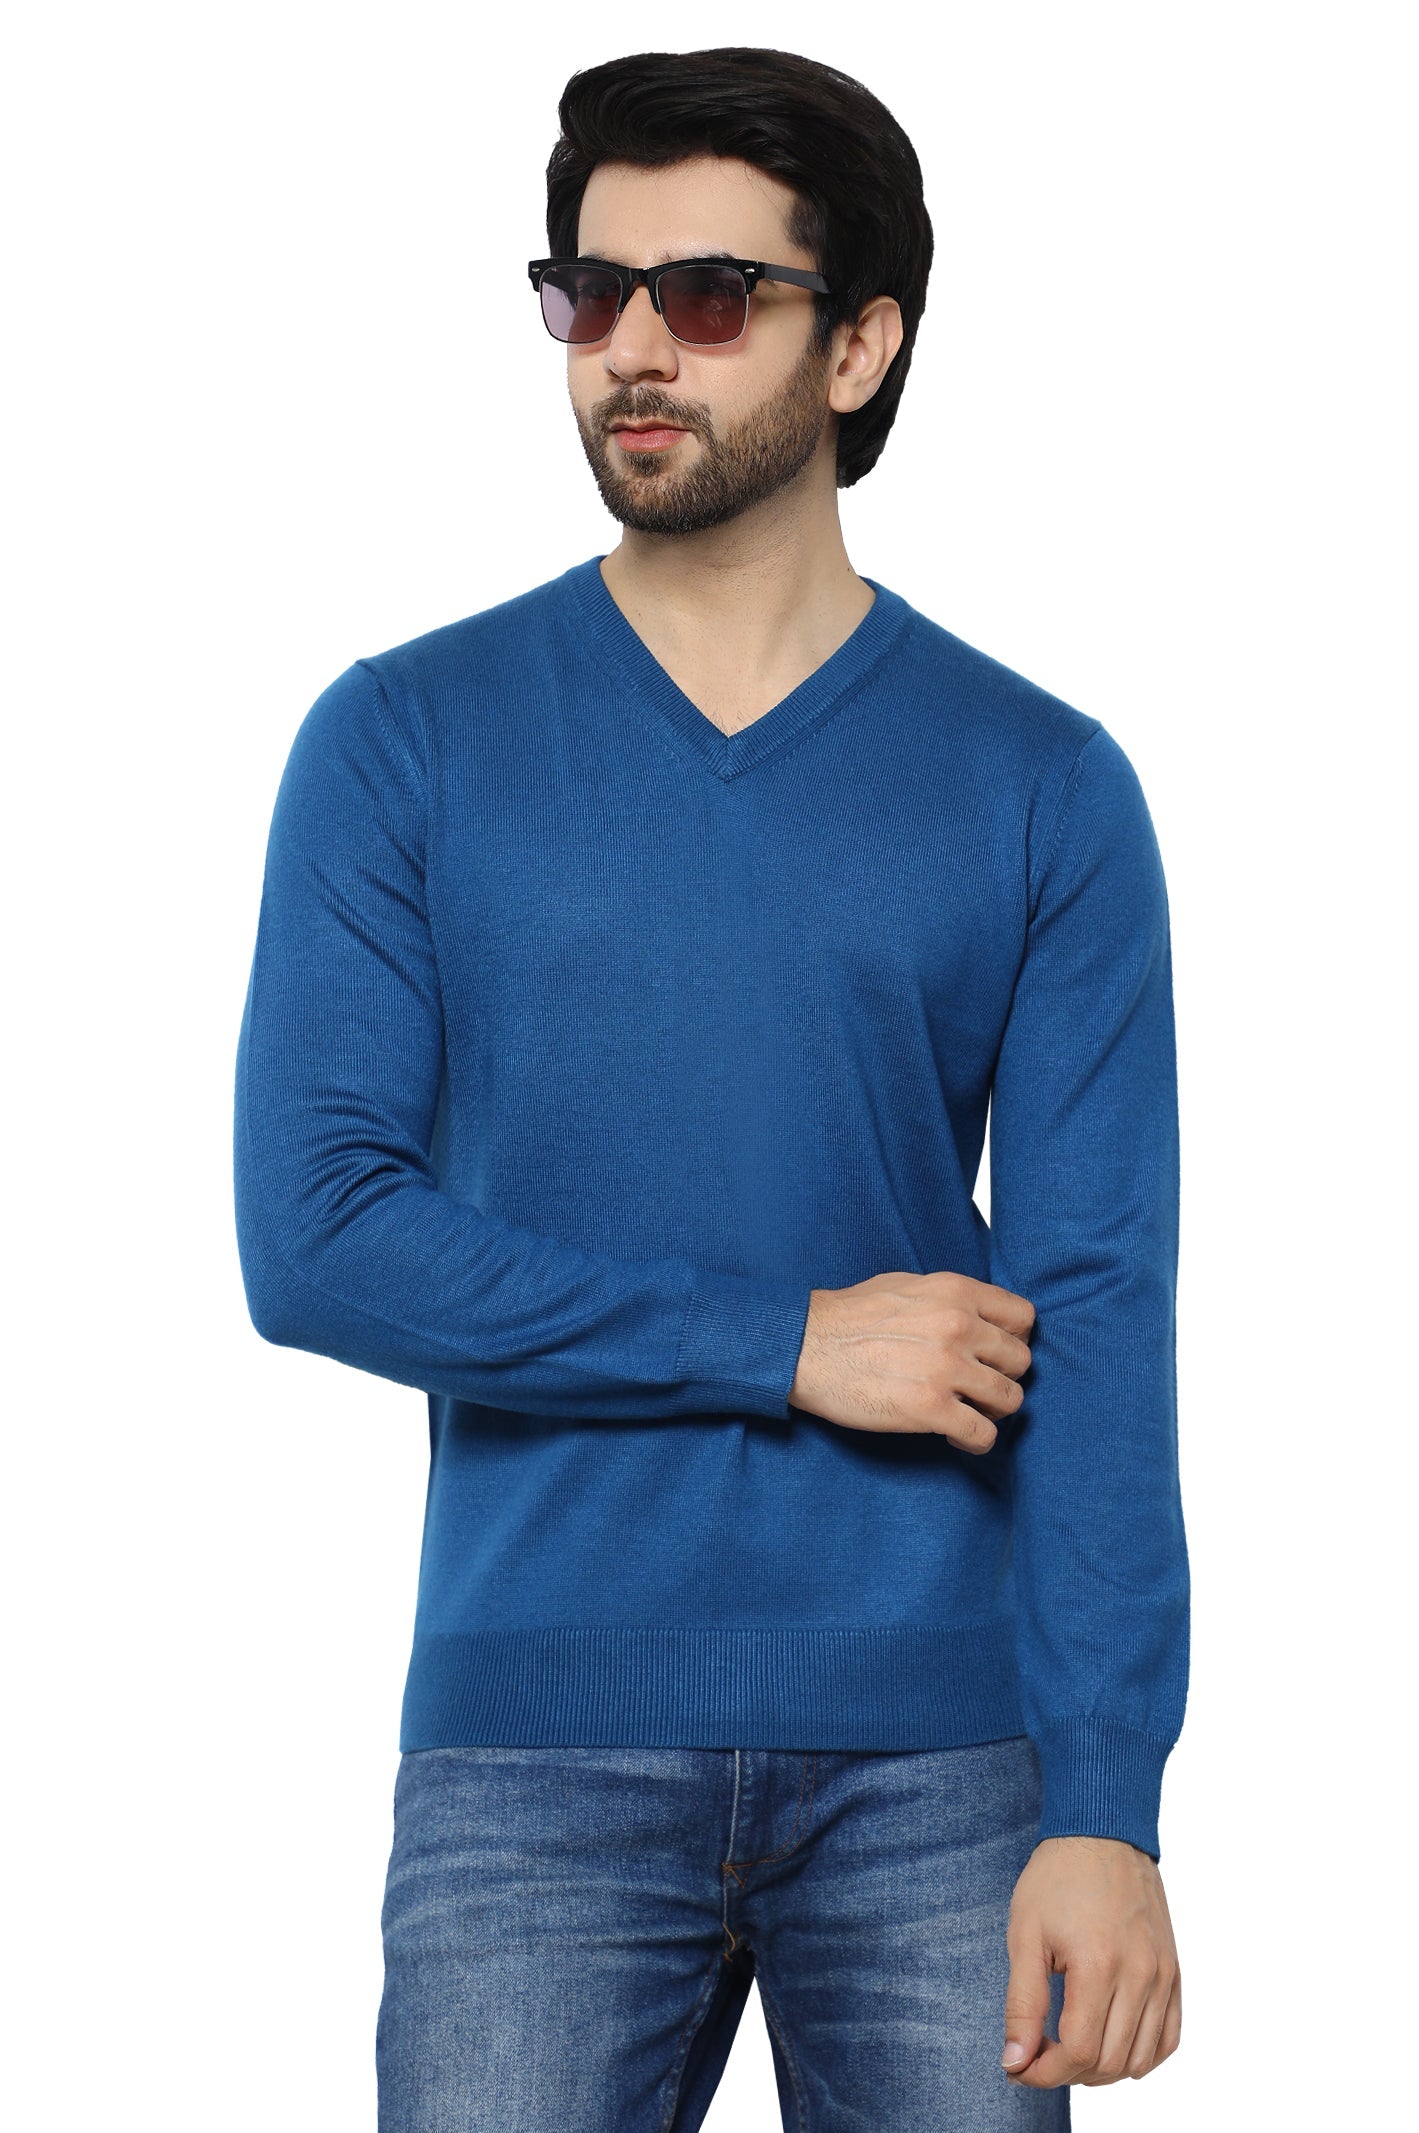 Sweater For Men's - Diners